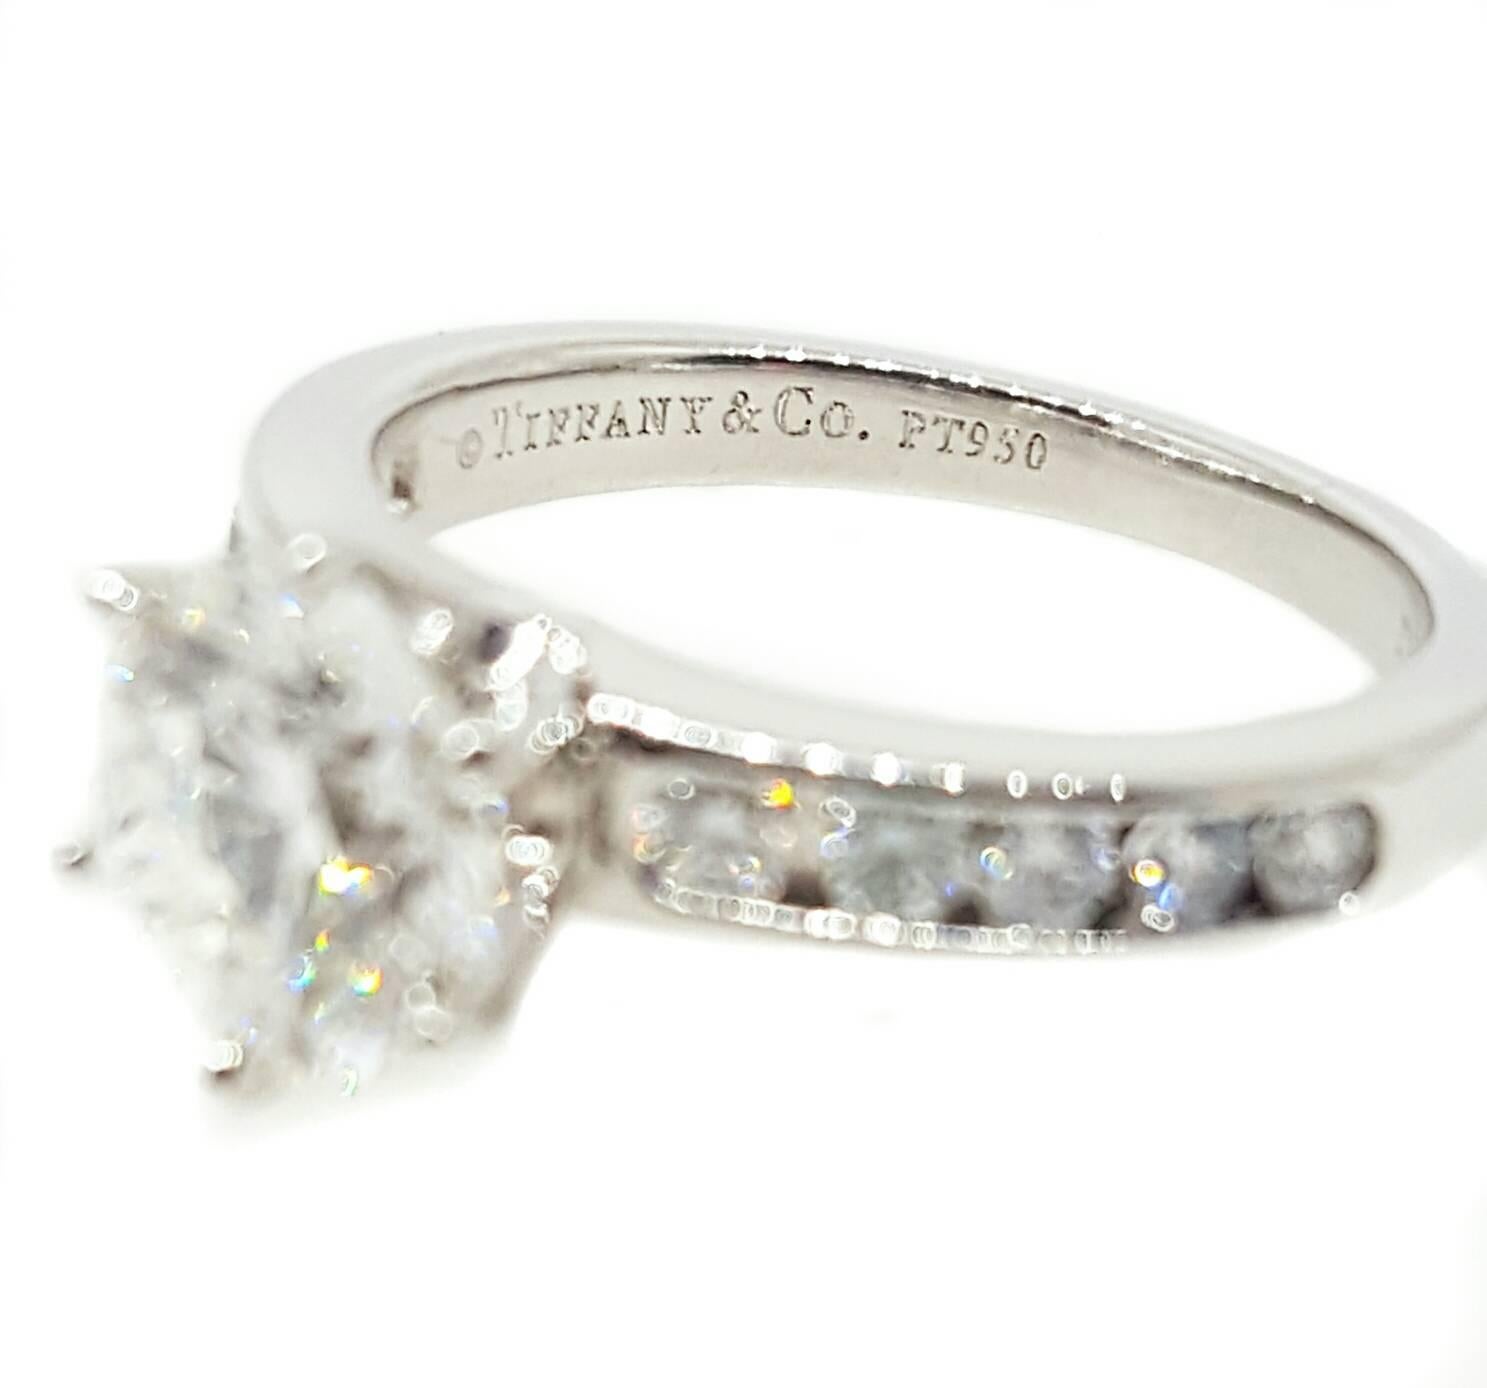 A stunning platinum engagement ring, made by Tiffany & Co., set with a 1.50ct  Round Brilliant cut diamond. The center diamond is GIA certified G color VS1 clarity.  In addition to the center stone, there are 10 round brilliant cut diamonds that